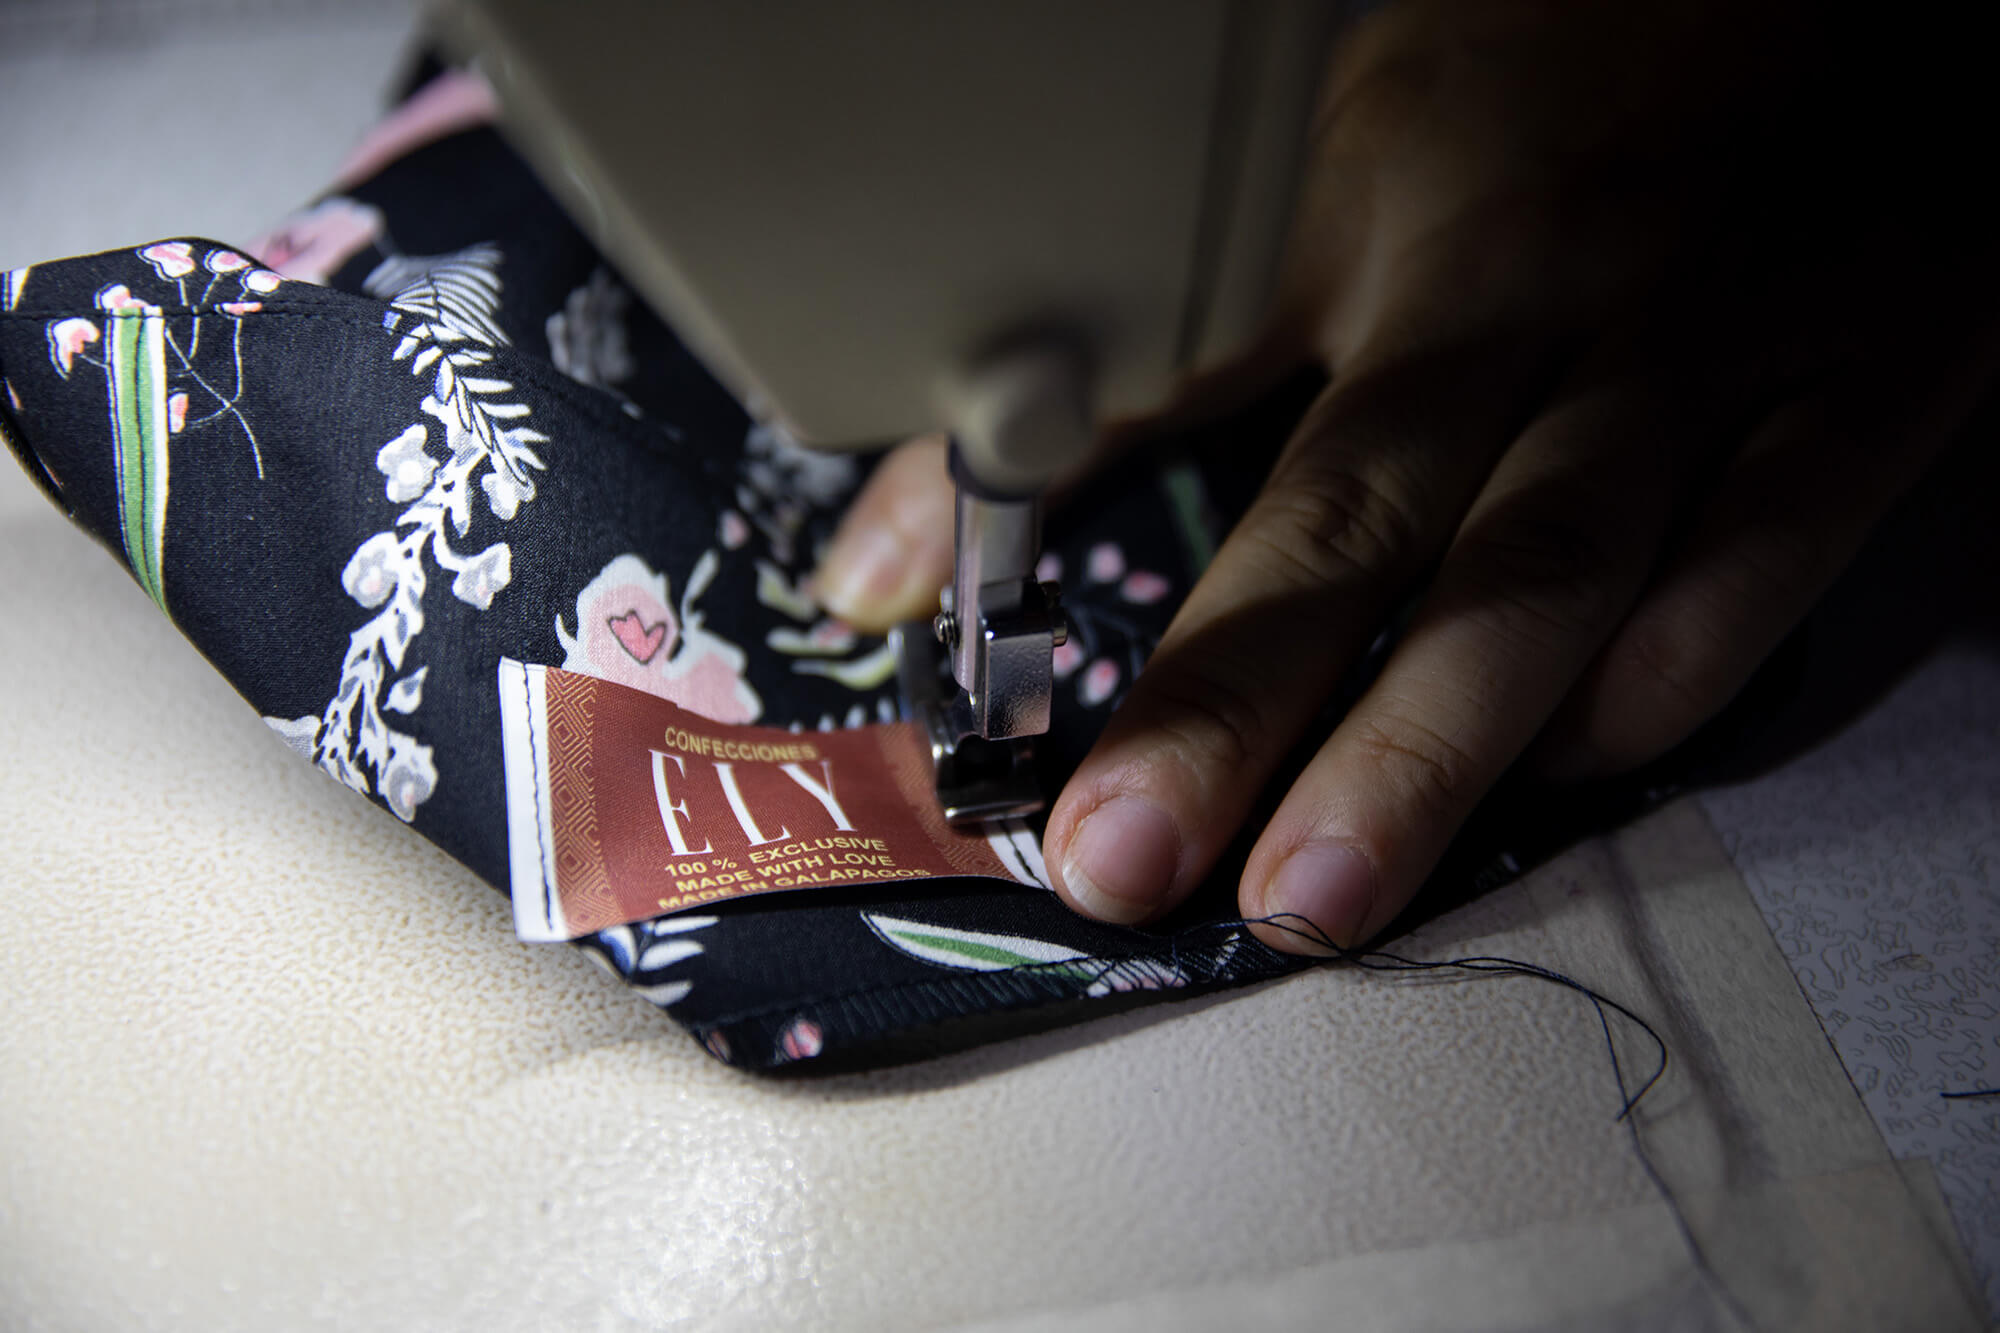 Close up of a sewing machine. Alava’s hand guides the edge of a pair of pants under the needle to stitch in her label, which reads “Confecciones Ely.”